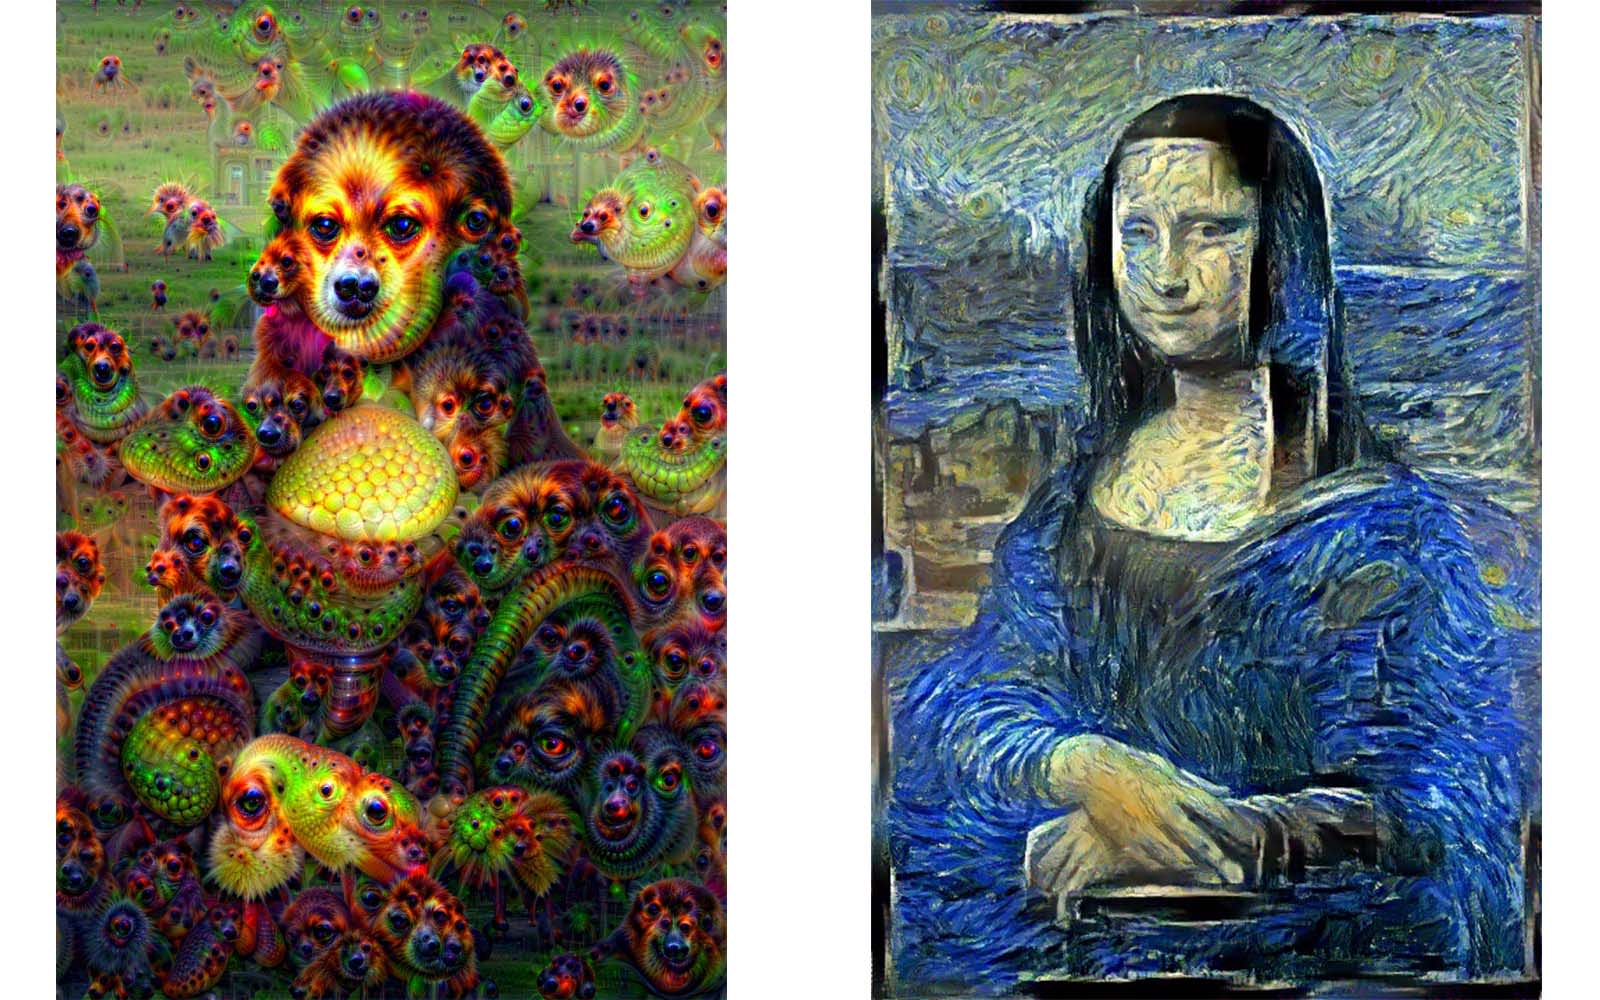 What Is an AI Art Generator? Features, Benefits and More